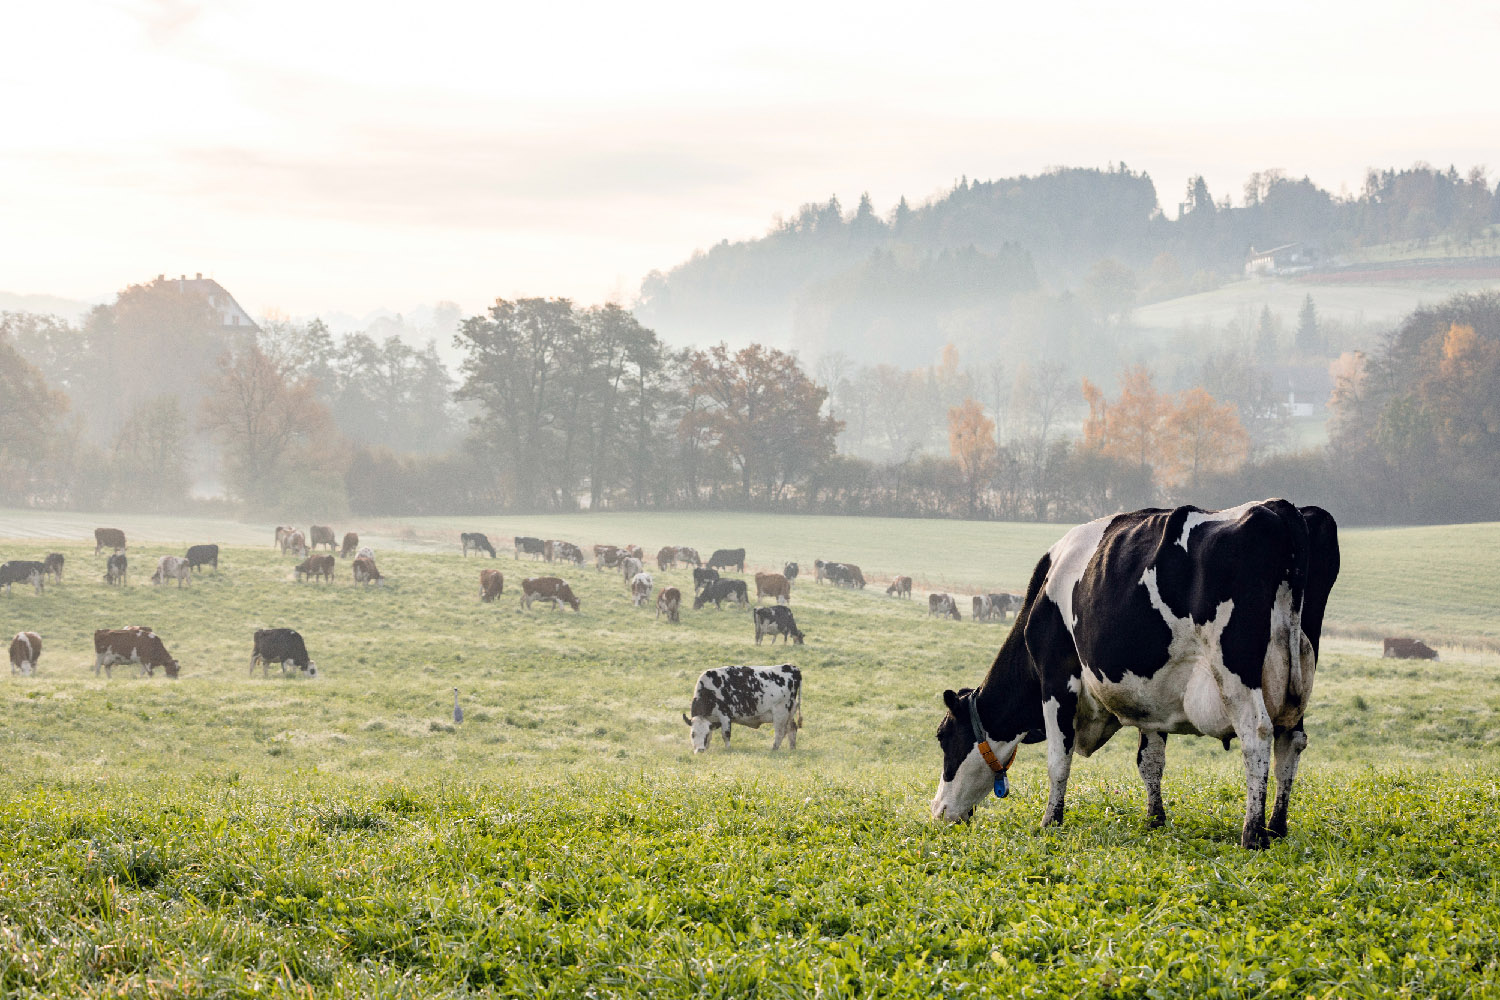 Black and white Holstein cows graze on a hill in the foggy morning.